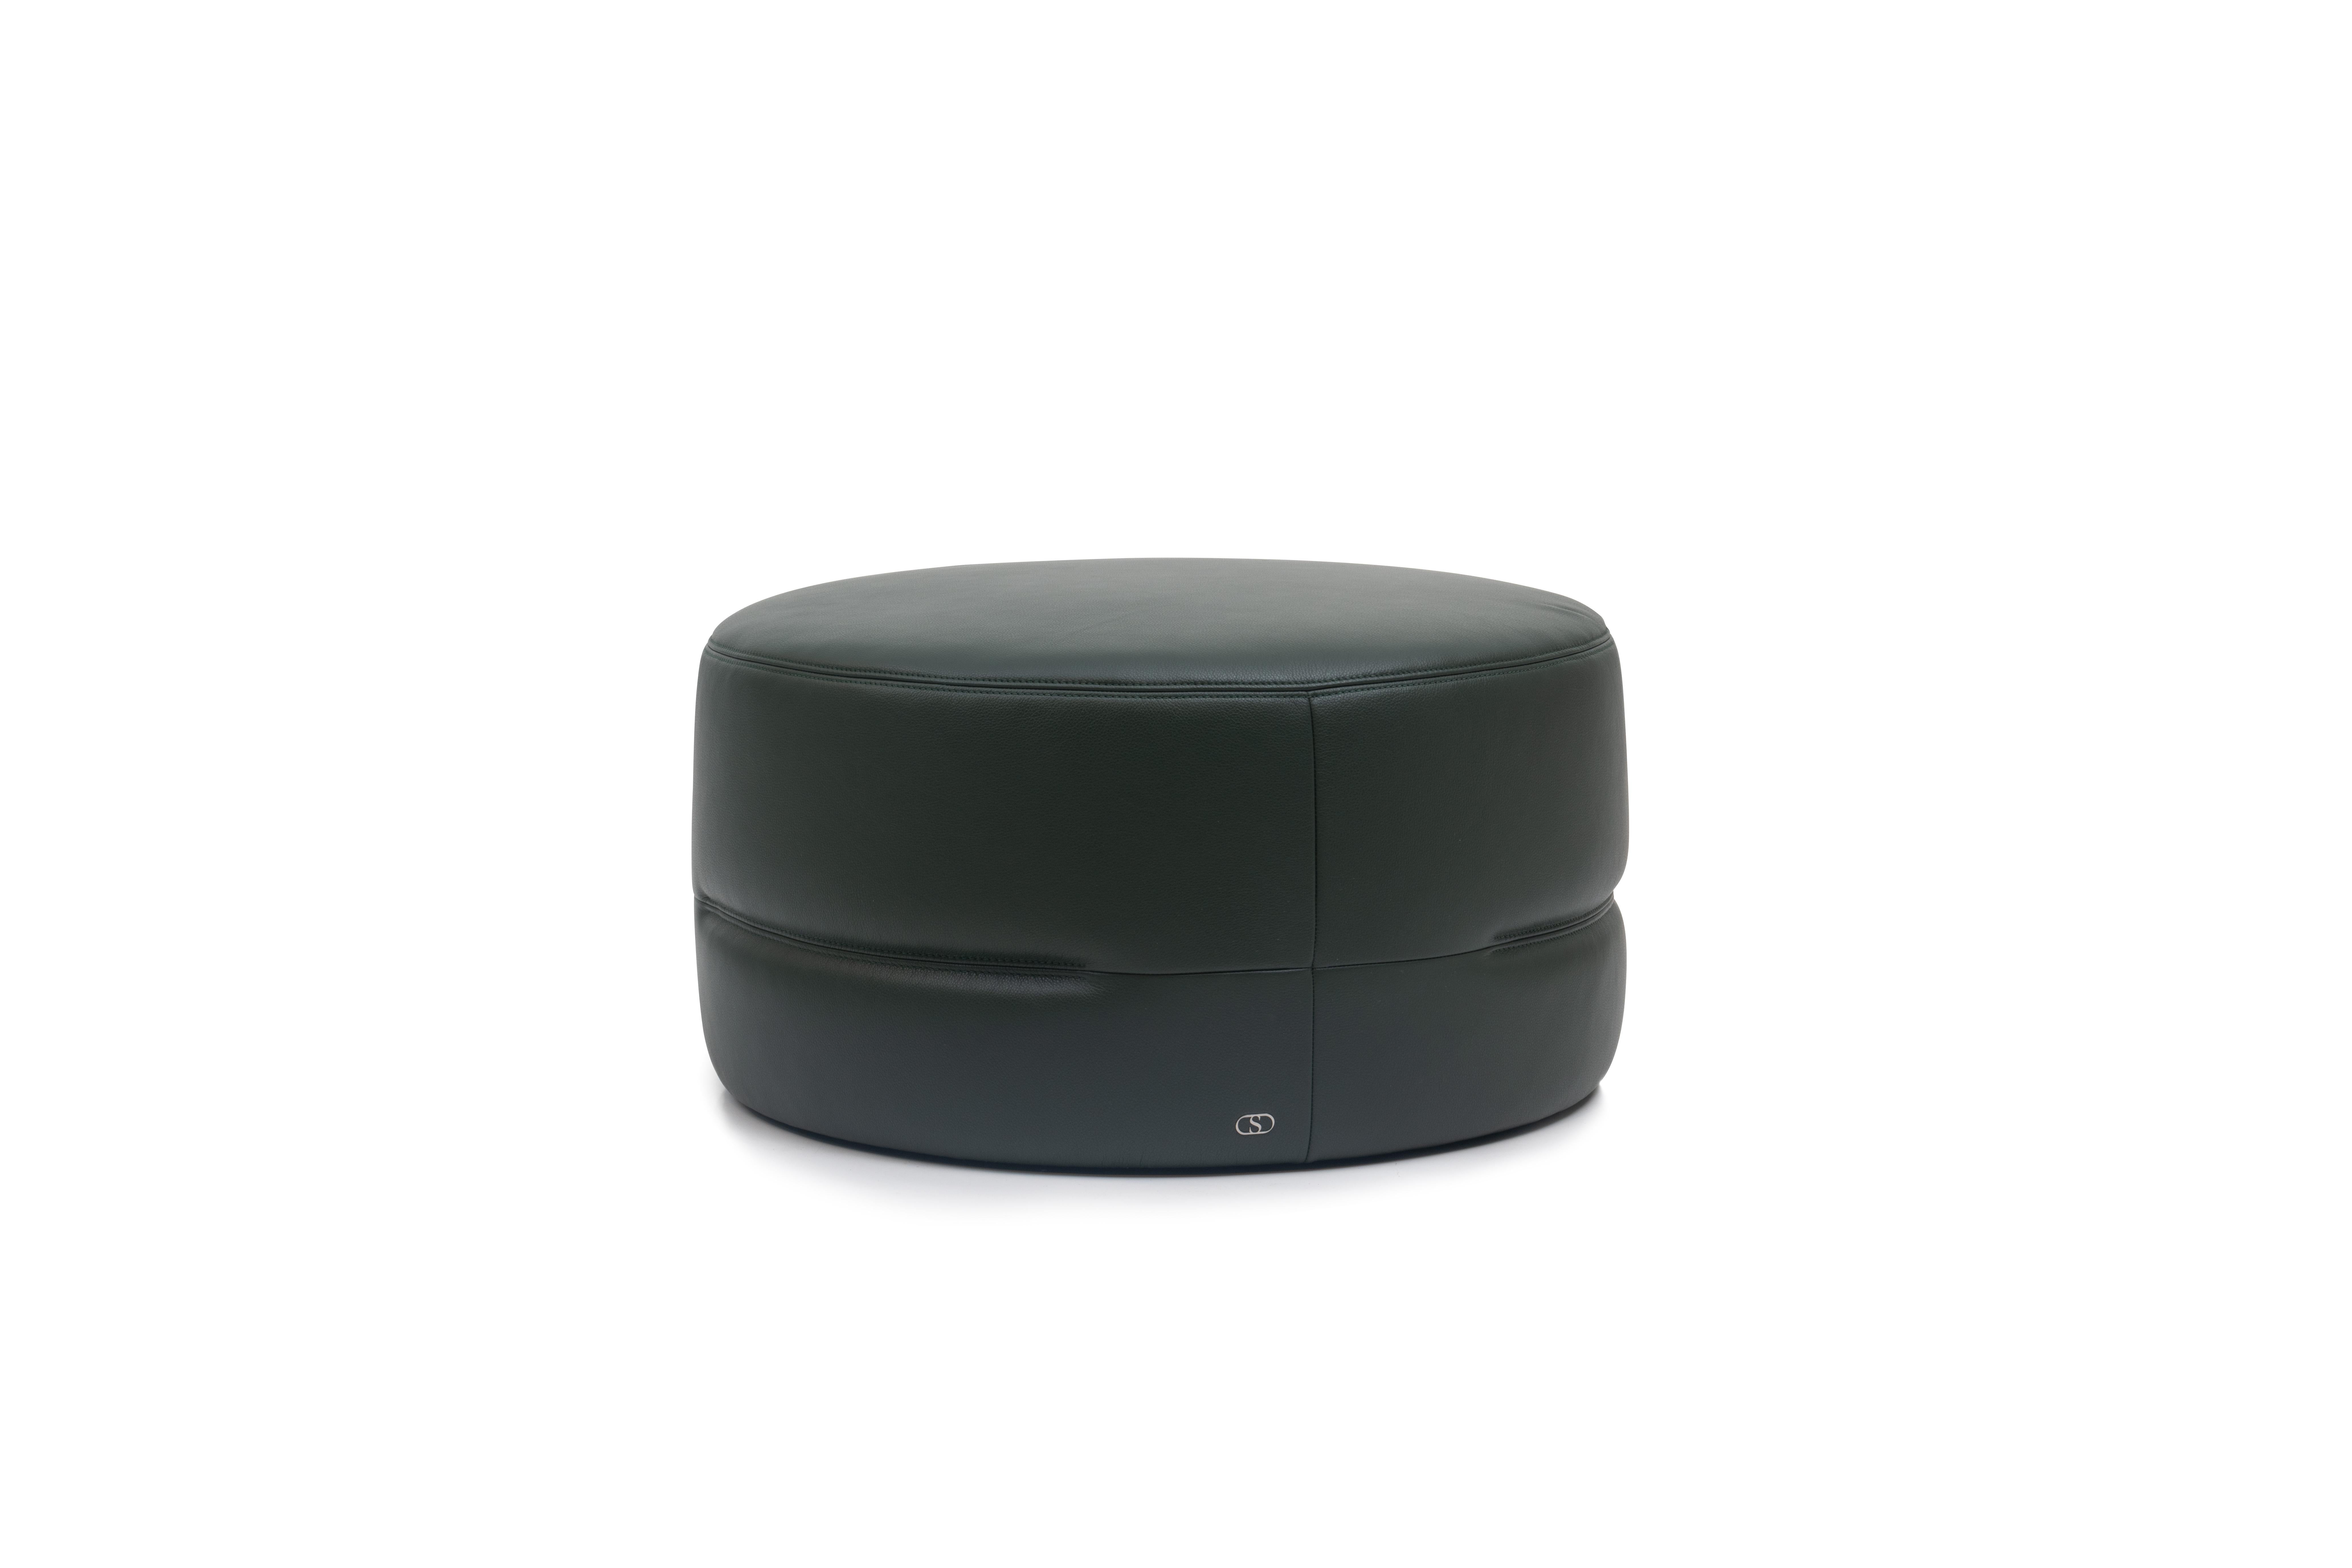 DS-760 pouf by De Sede
Dimensions: D 74 x H 40 cm
Materials: wood, leather

Prices may change according to the chosen materials and size. 

Elegance manifests itself in simplicity

“Less is more” is the motto for the pouf DS-760. The stool